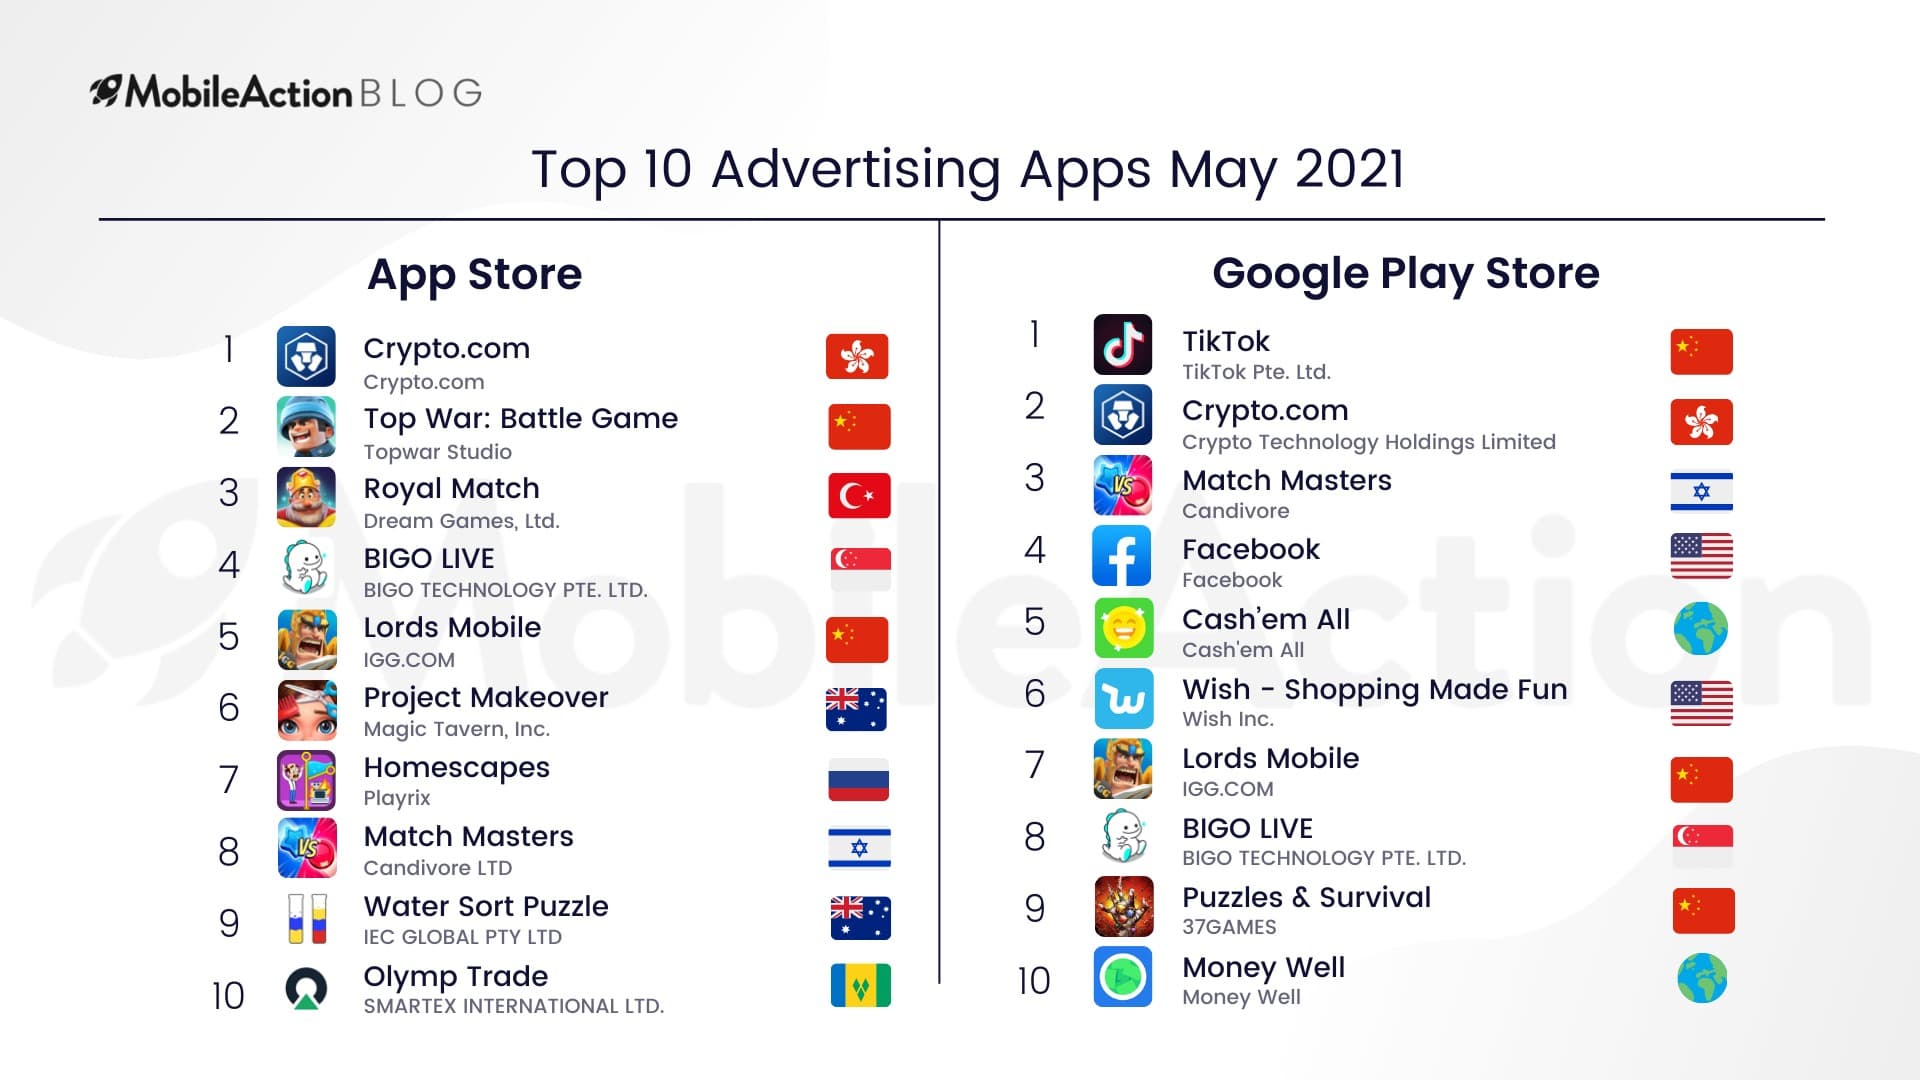 Top Advertising Apps of May 2021